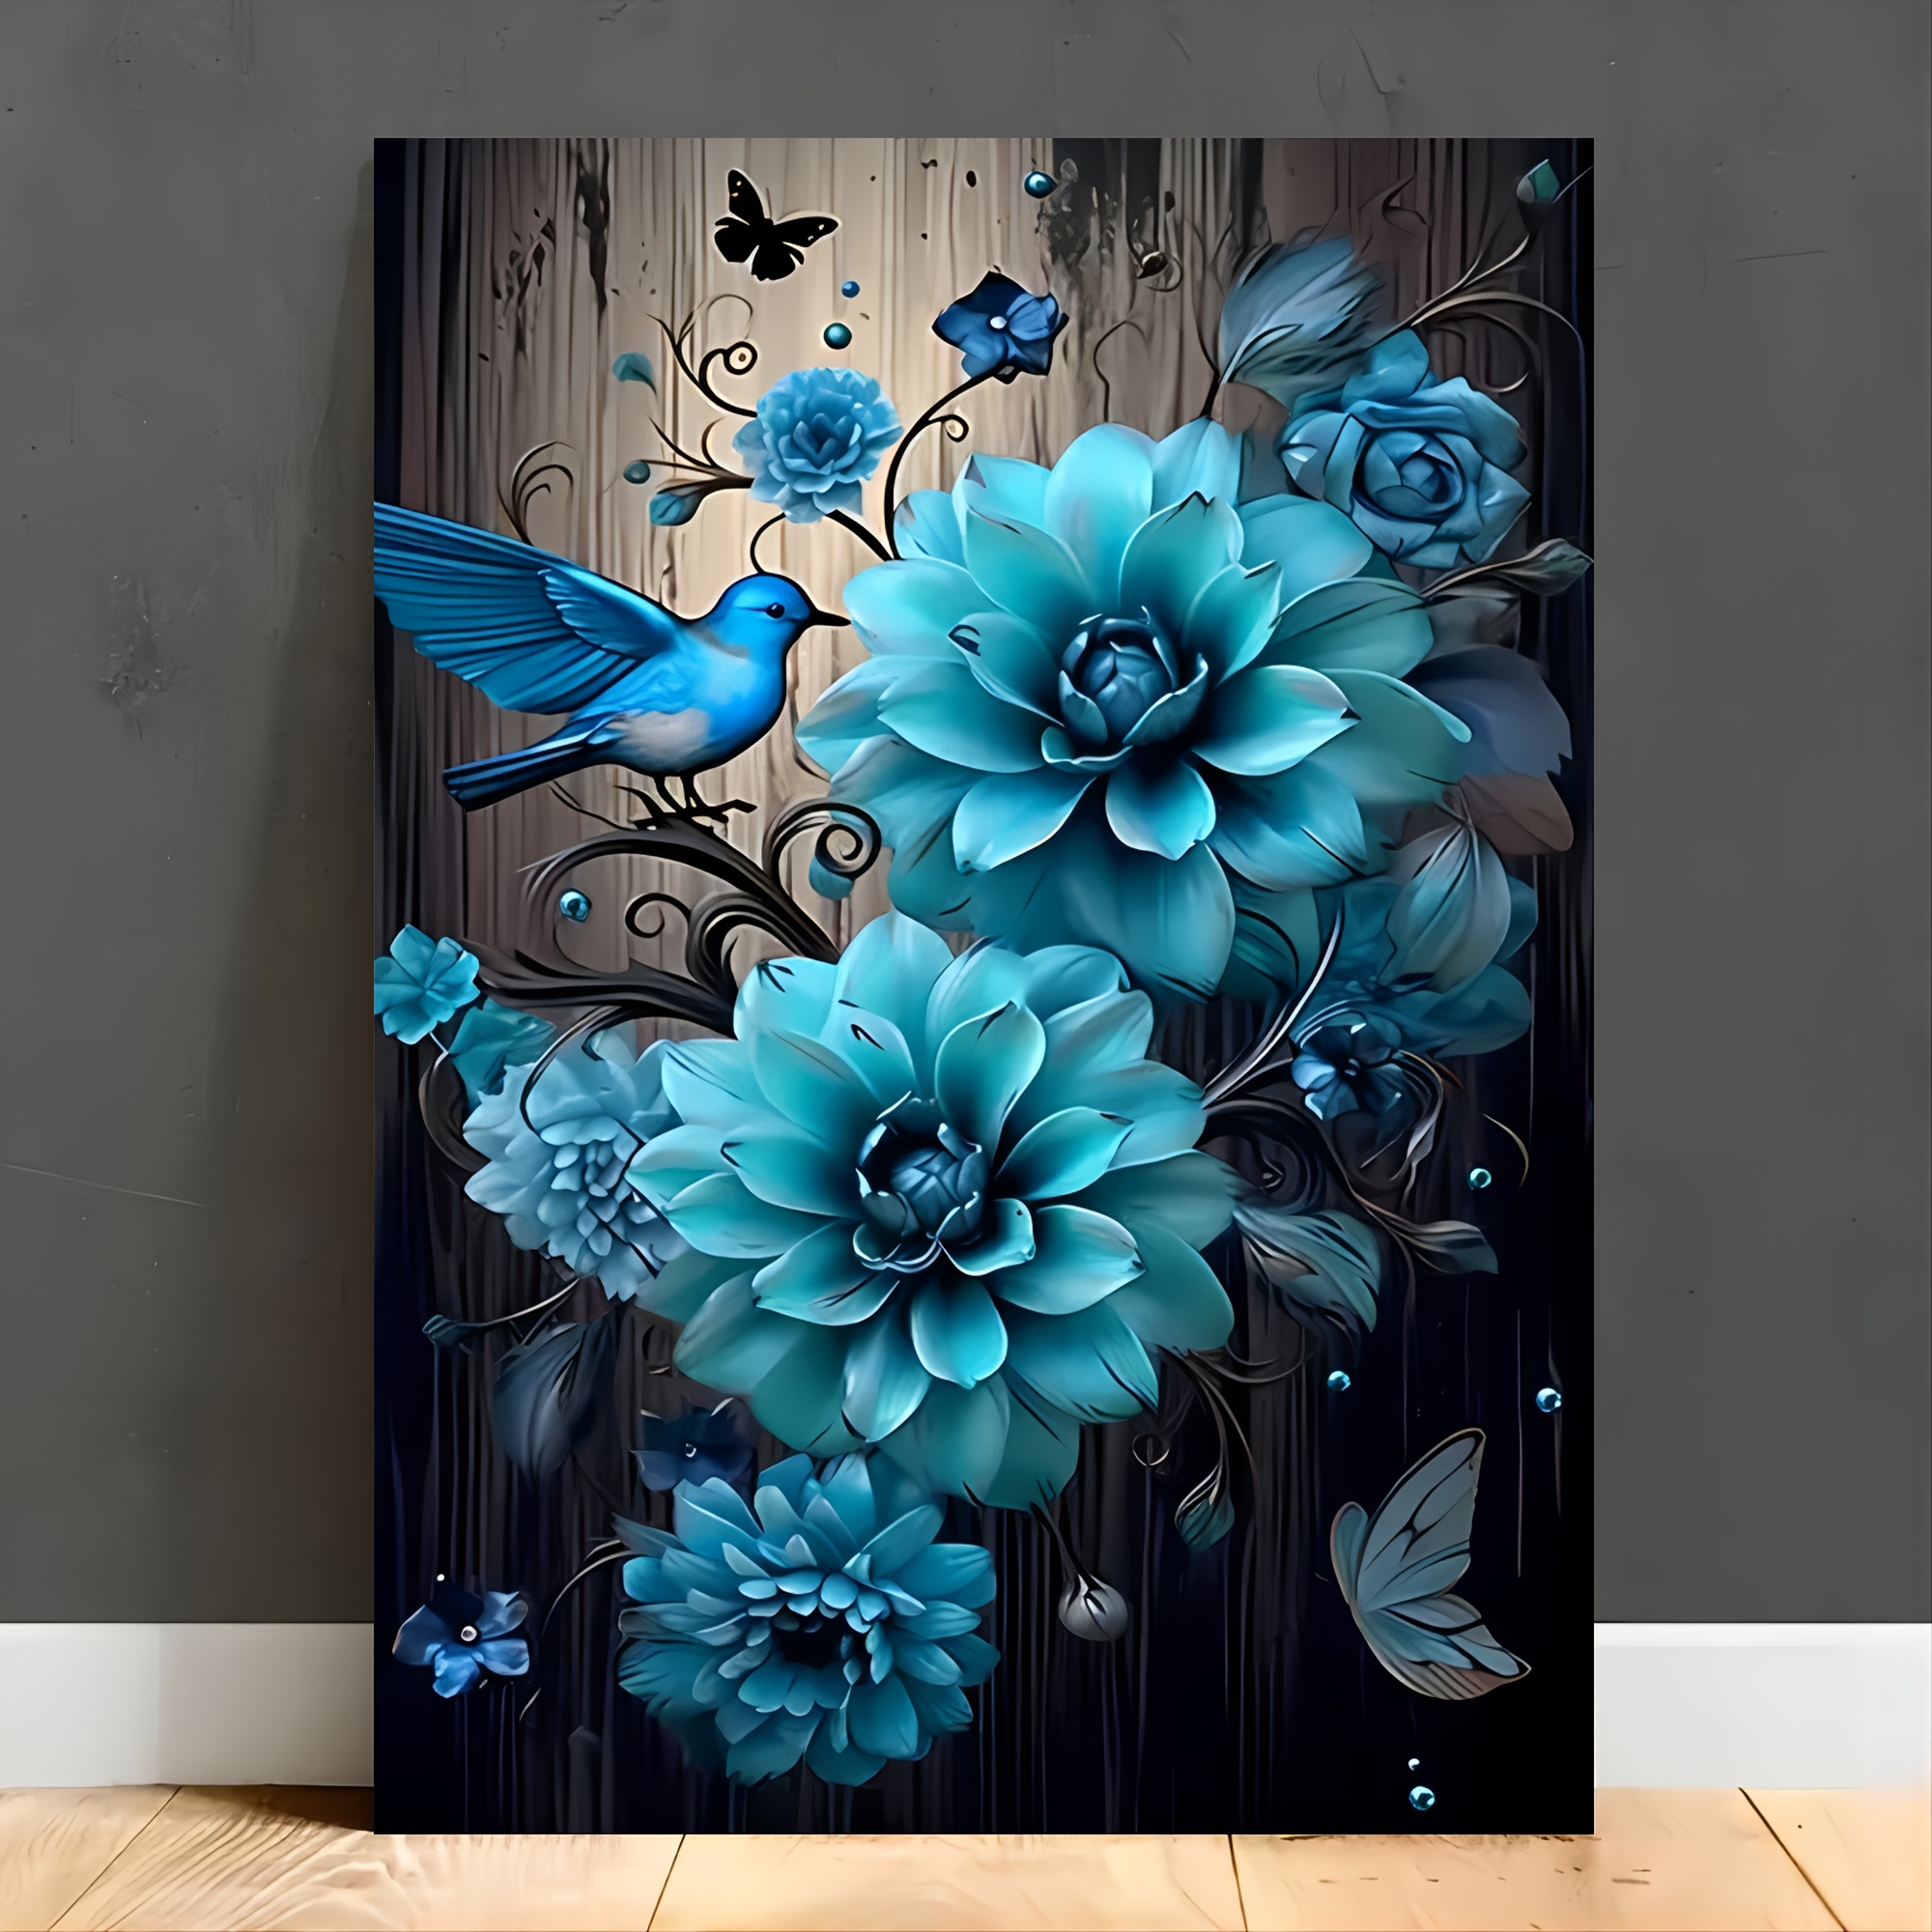 

1pc Wooden Framed Canvas Painting, Blue Flower Canvas Wall Art, Artwork Wall Painting For Bathroom Bedroom Office Living Room Wall Decor, Home Decoration Perfect Gift Ready To Hang (out Of The Box)